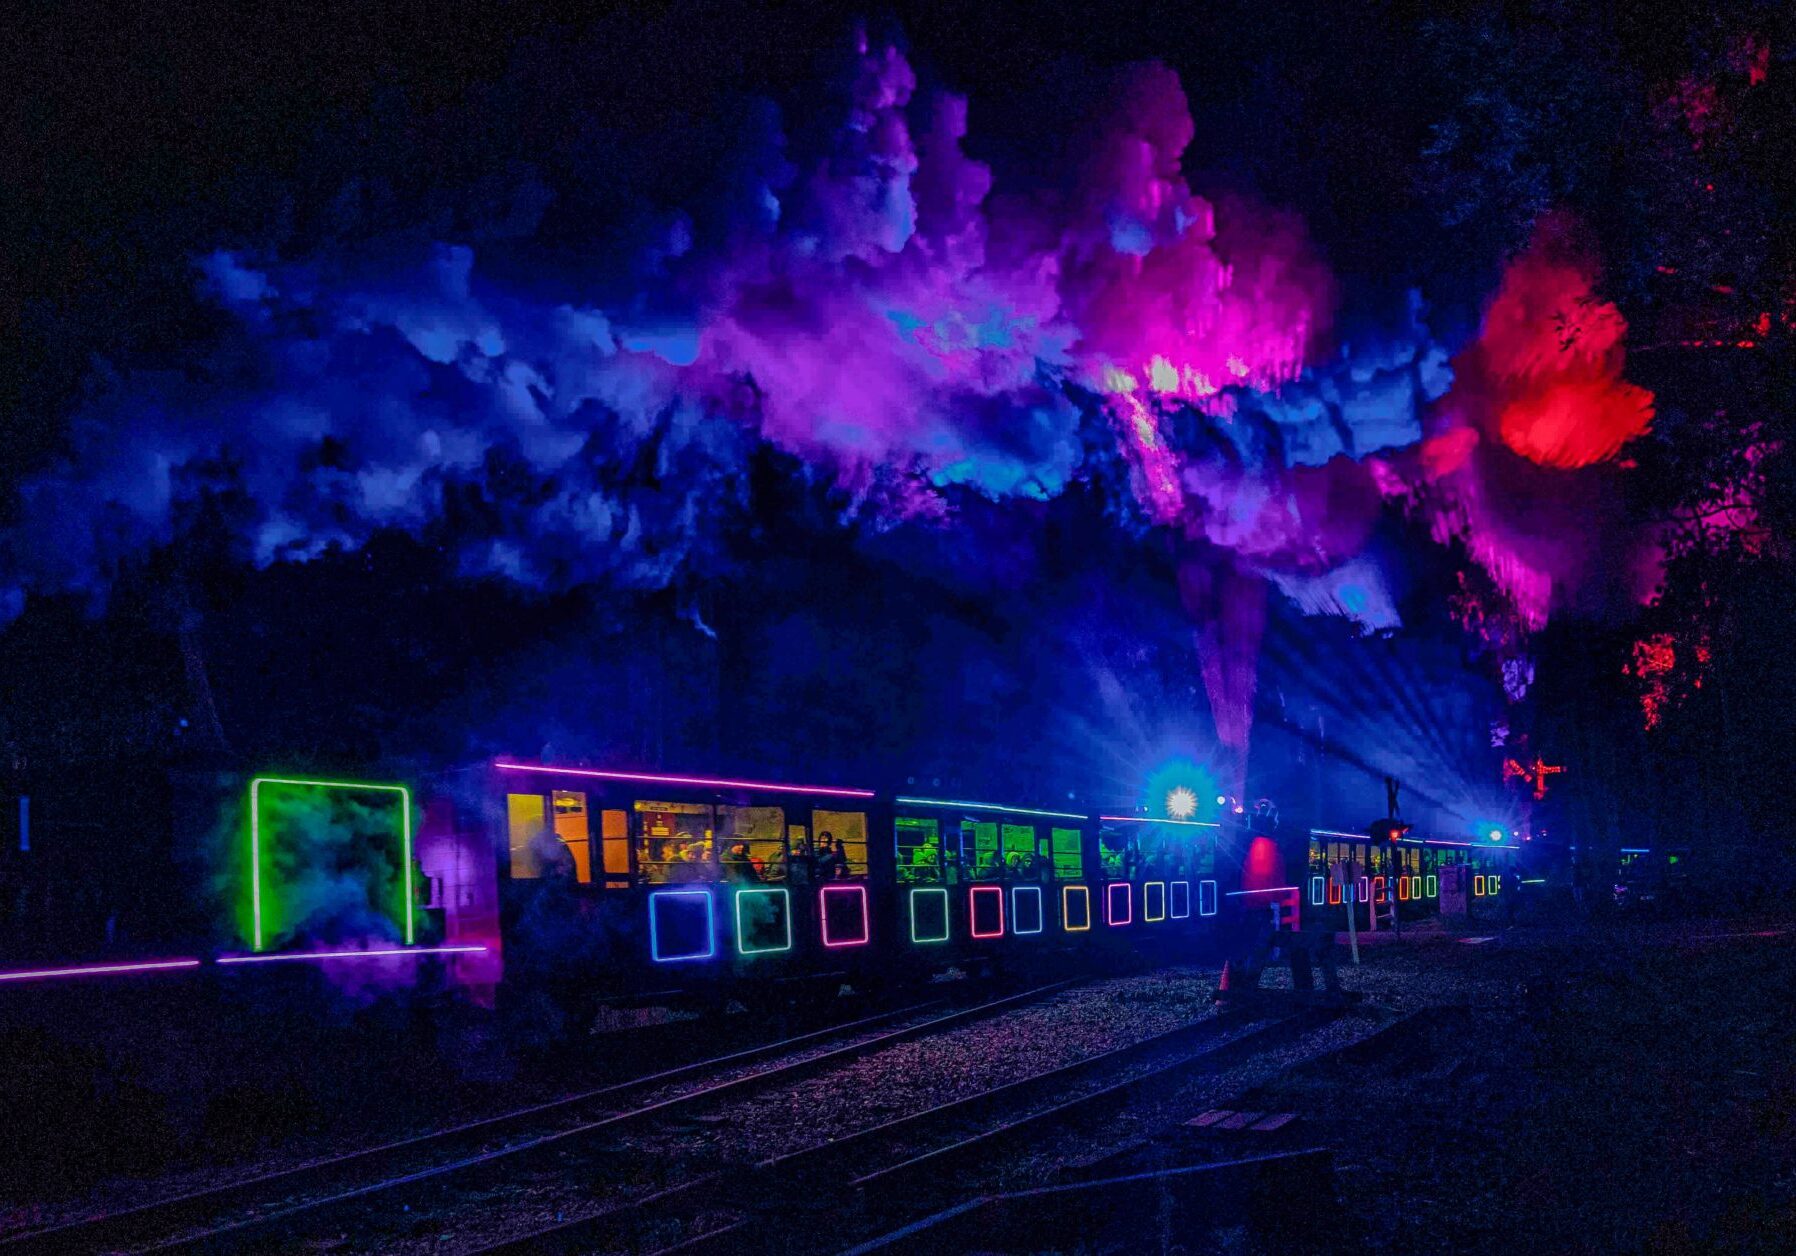 A illuminated steam train in the darkness. The train and steam are lit up in purple, pink, red, blue and green hues.